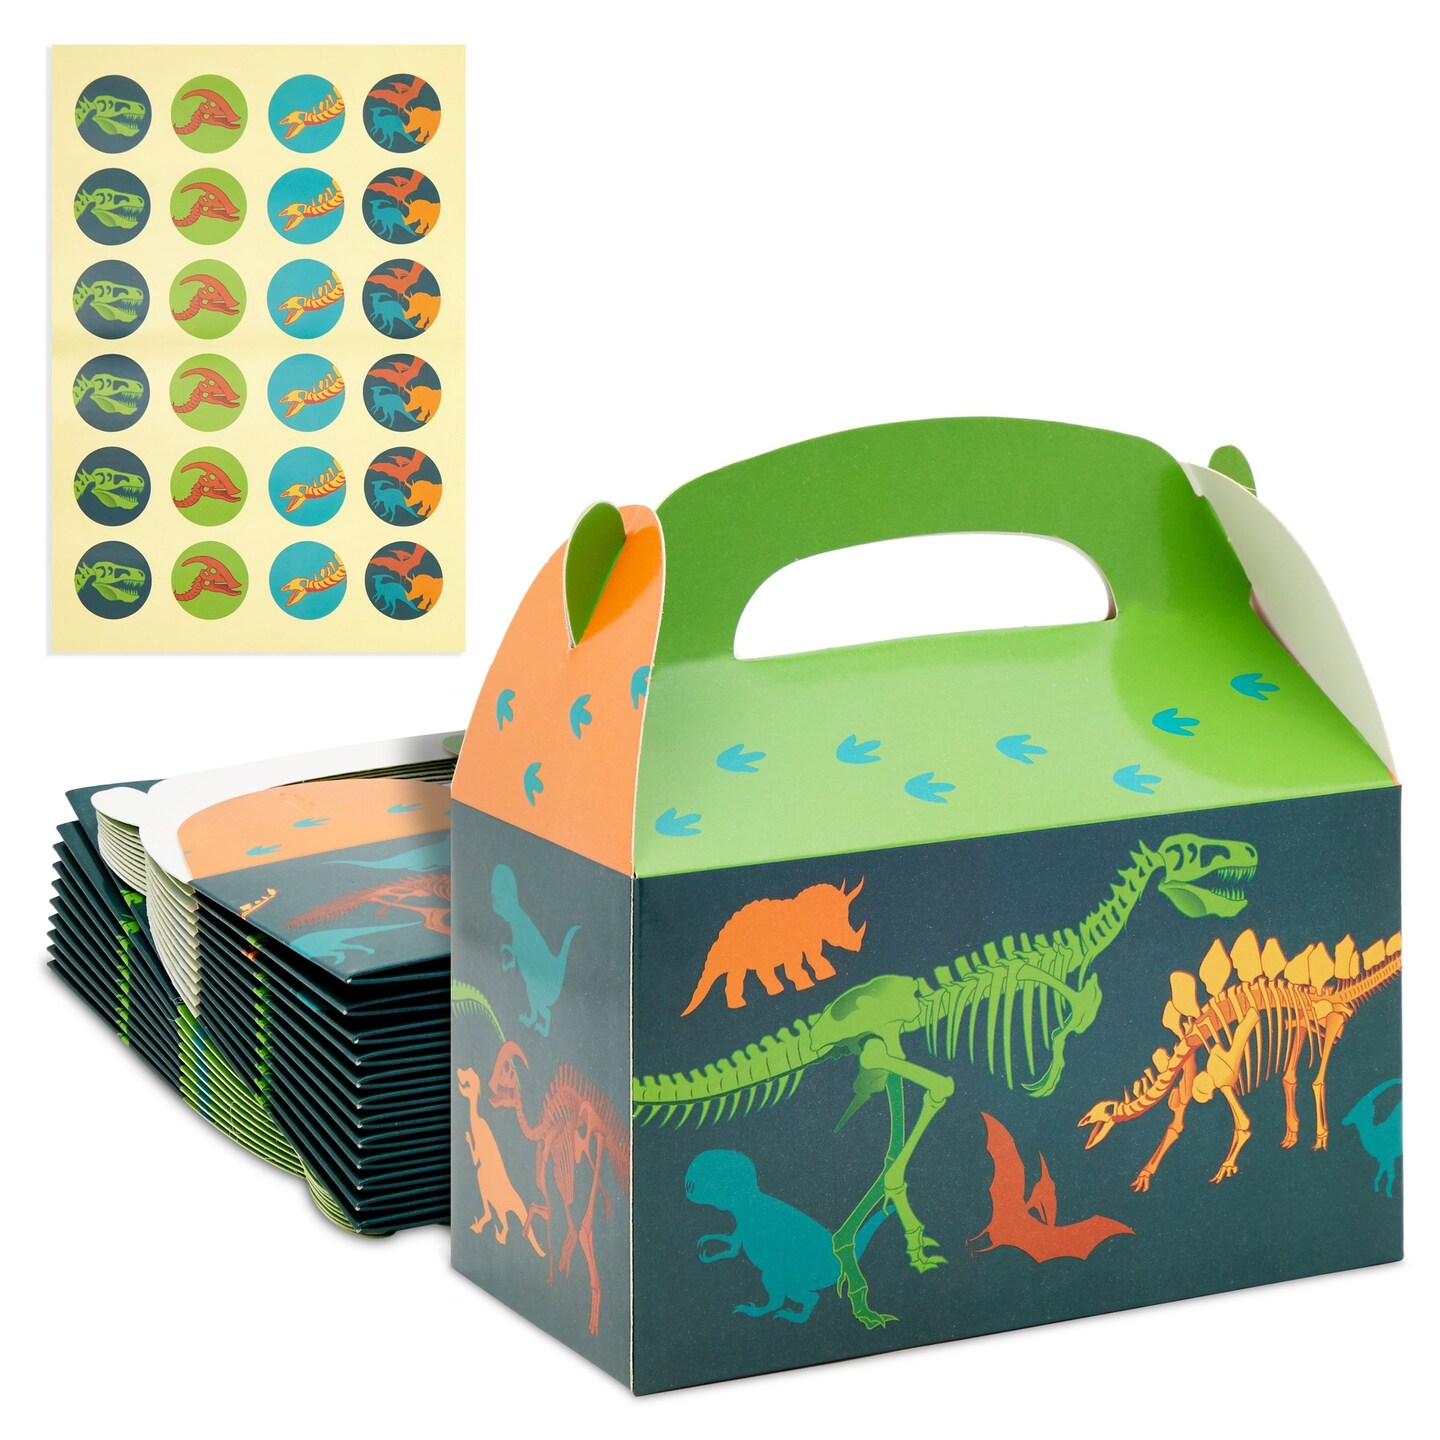 24 Pack Dinosaur Treat Boxes with Handle and Stickers - Dino Party Favors for Kids&#x27; Birthday Supplies (6.2 x 3.6 x 3.5 in)